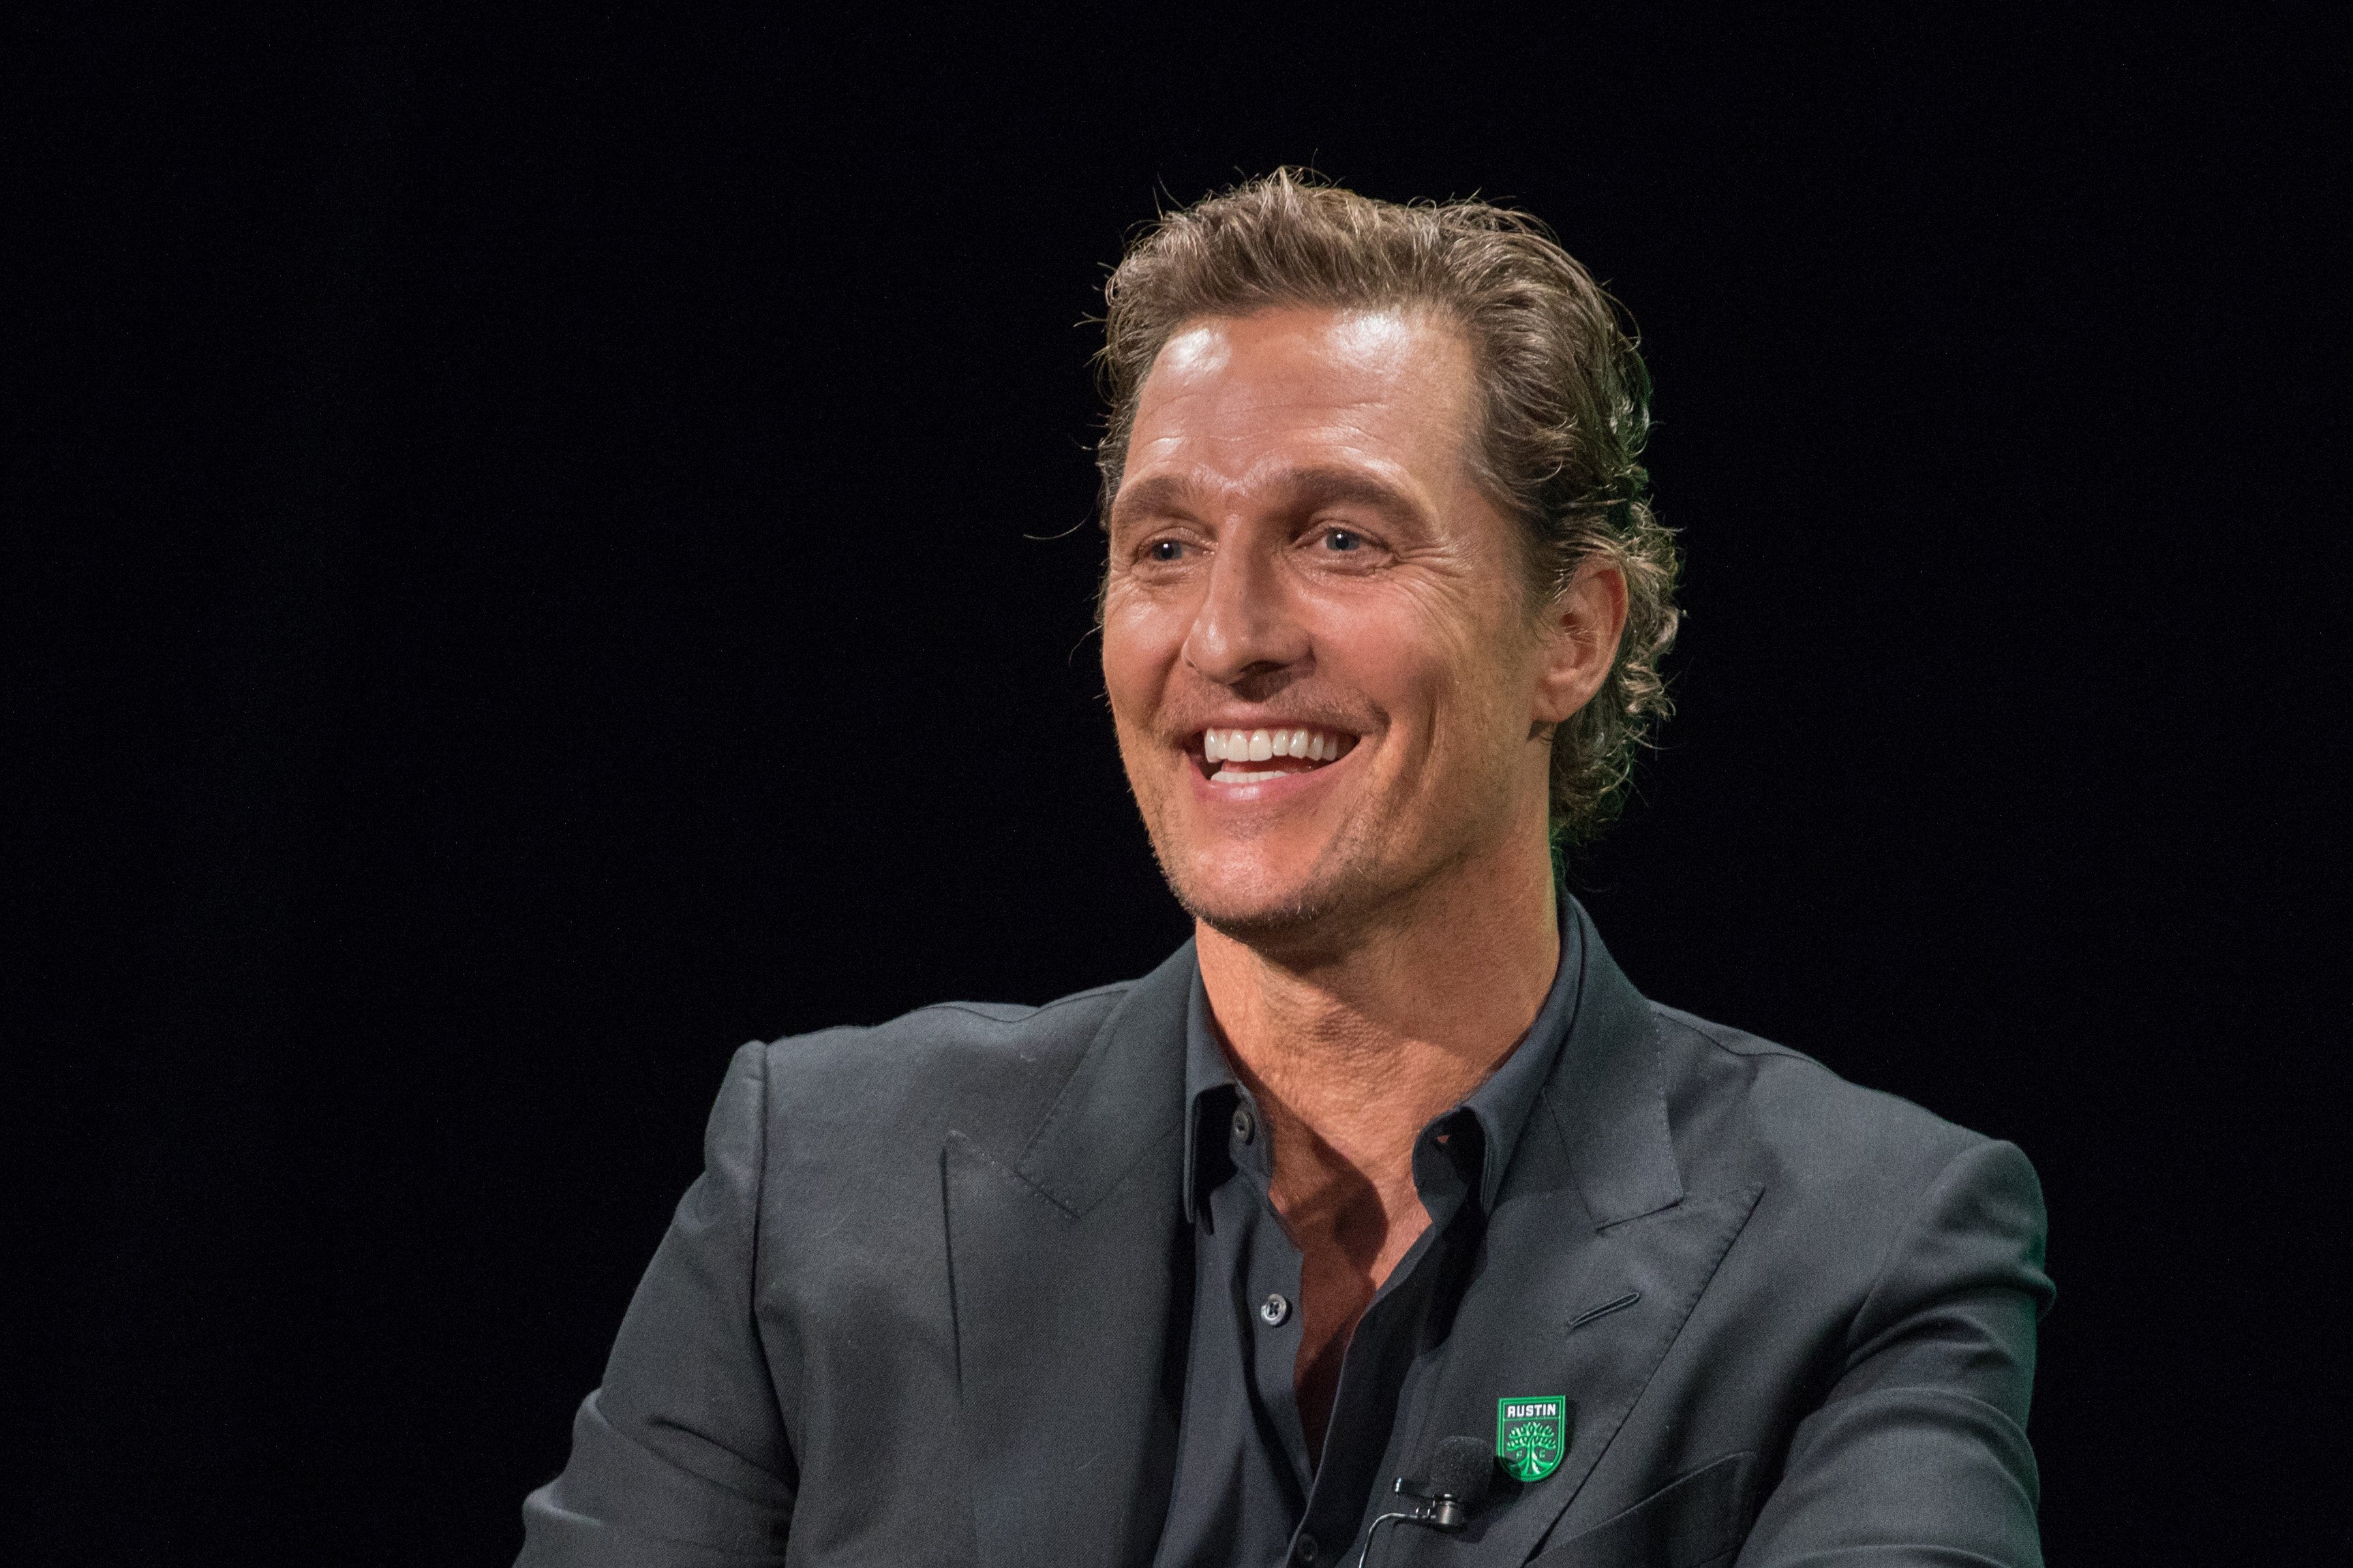 Matthew McConaughey, 3TEN ACL Live am 23. August 2019 in Austin, Texas | Quelle: Getty Images